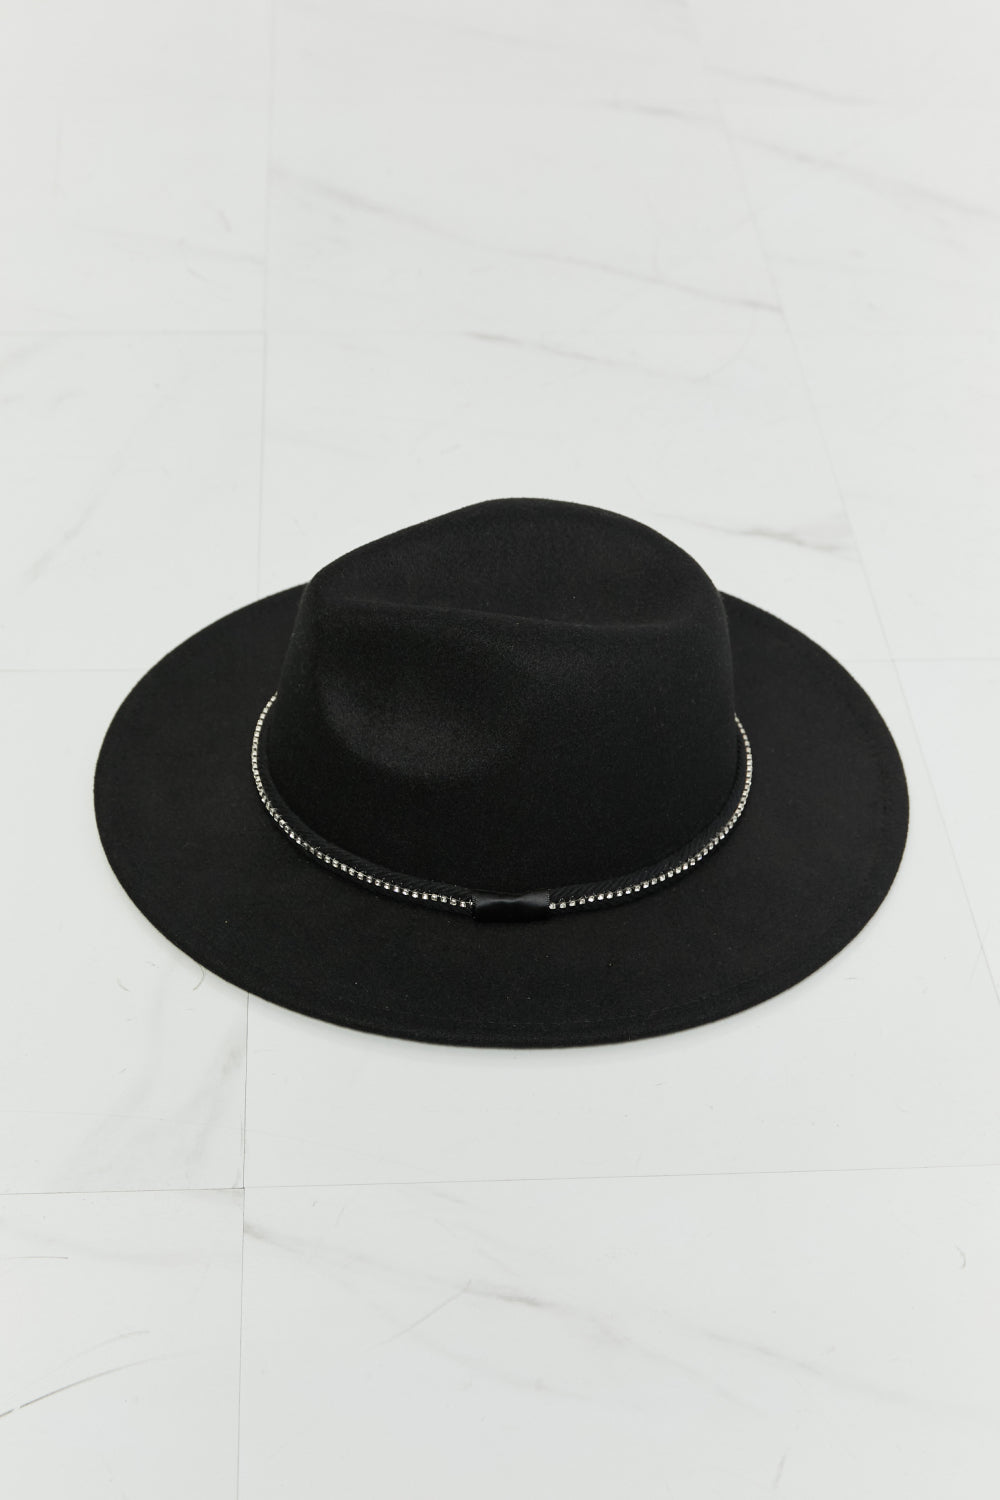 Fame Bring It Back Fedora Hat Print on any thing USA/STOD clothes